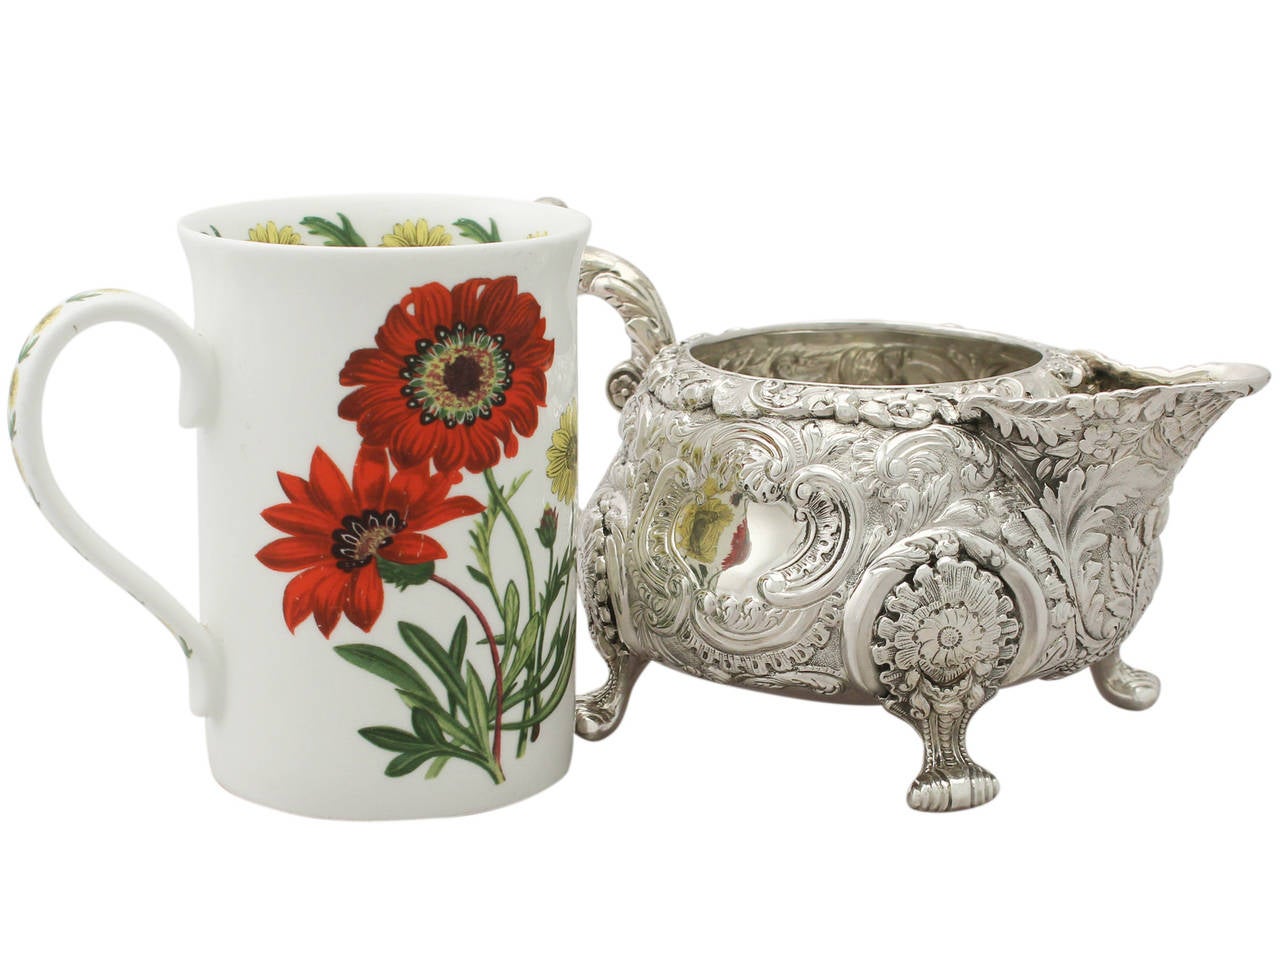 An exceptional, fine and impressive antique George IV English sterling silver creamer; part of our silver teaware collection.
This exceptional antique George IV sterling silver cream jug has a circular rounded compressed form.
The body is